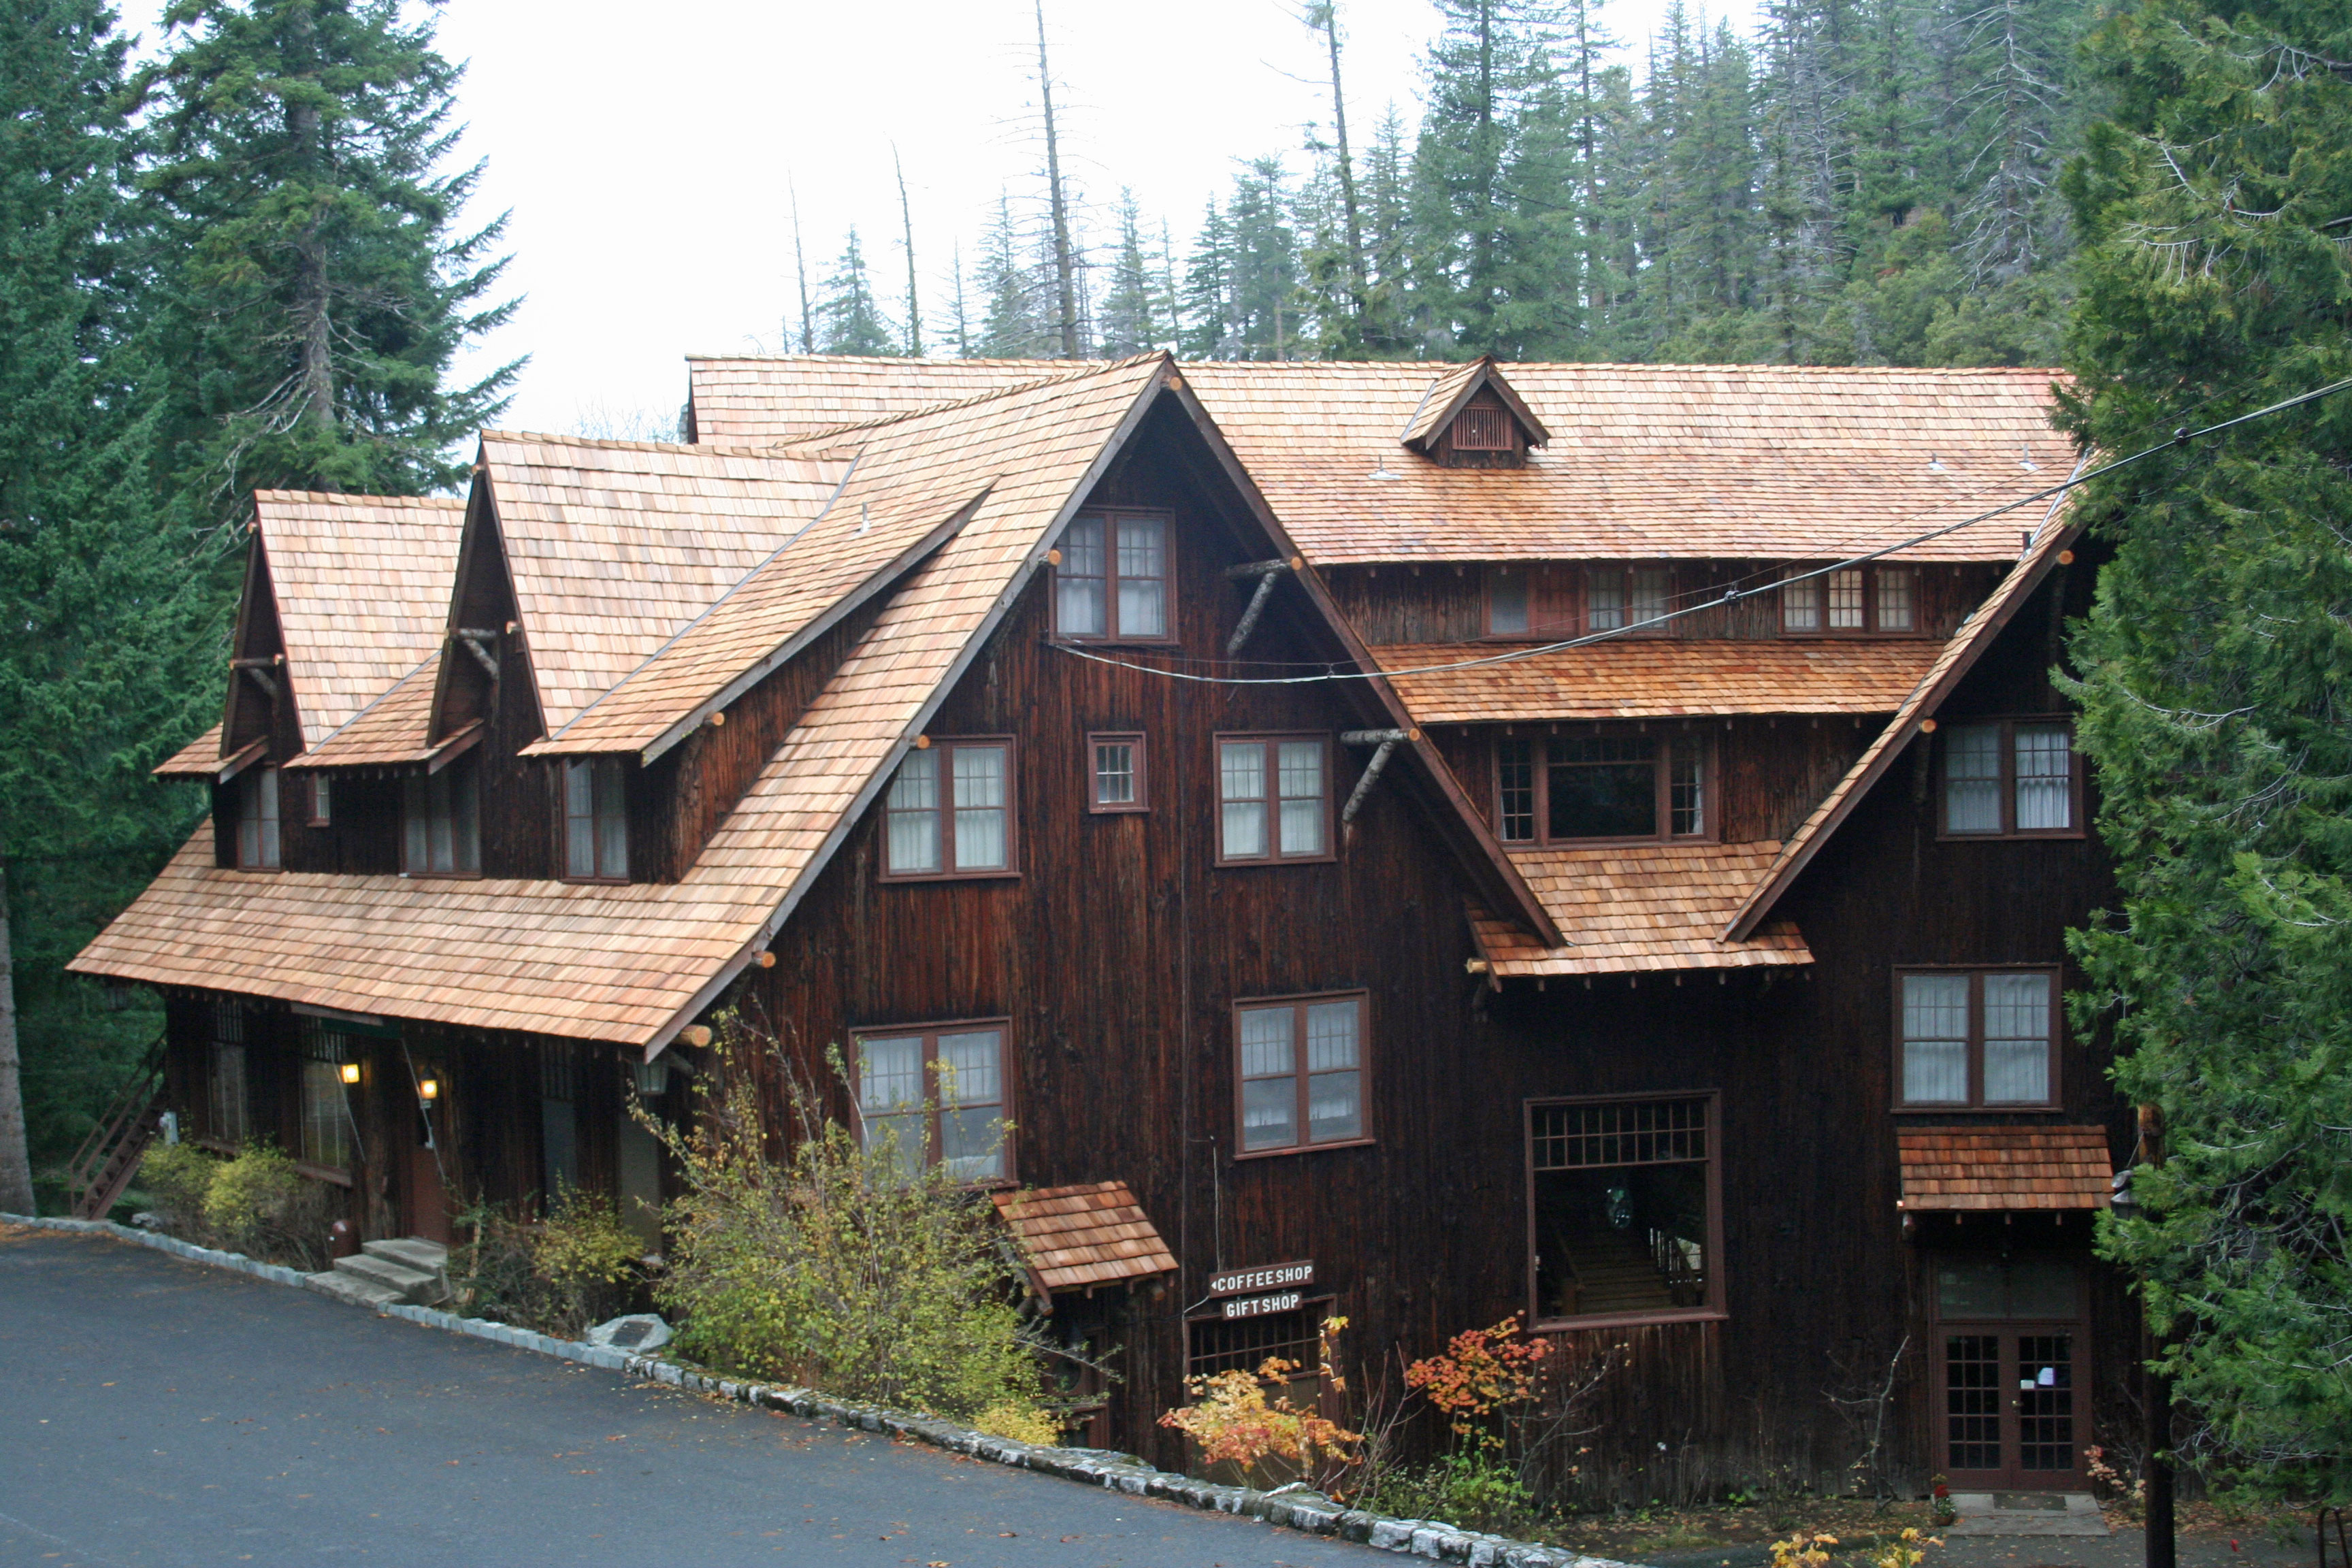 Side view of Oregon Caves Chateau